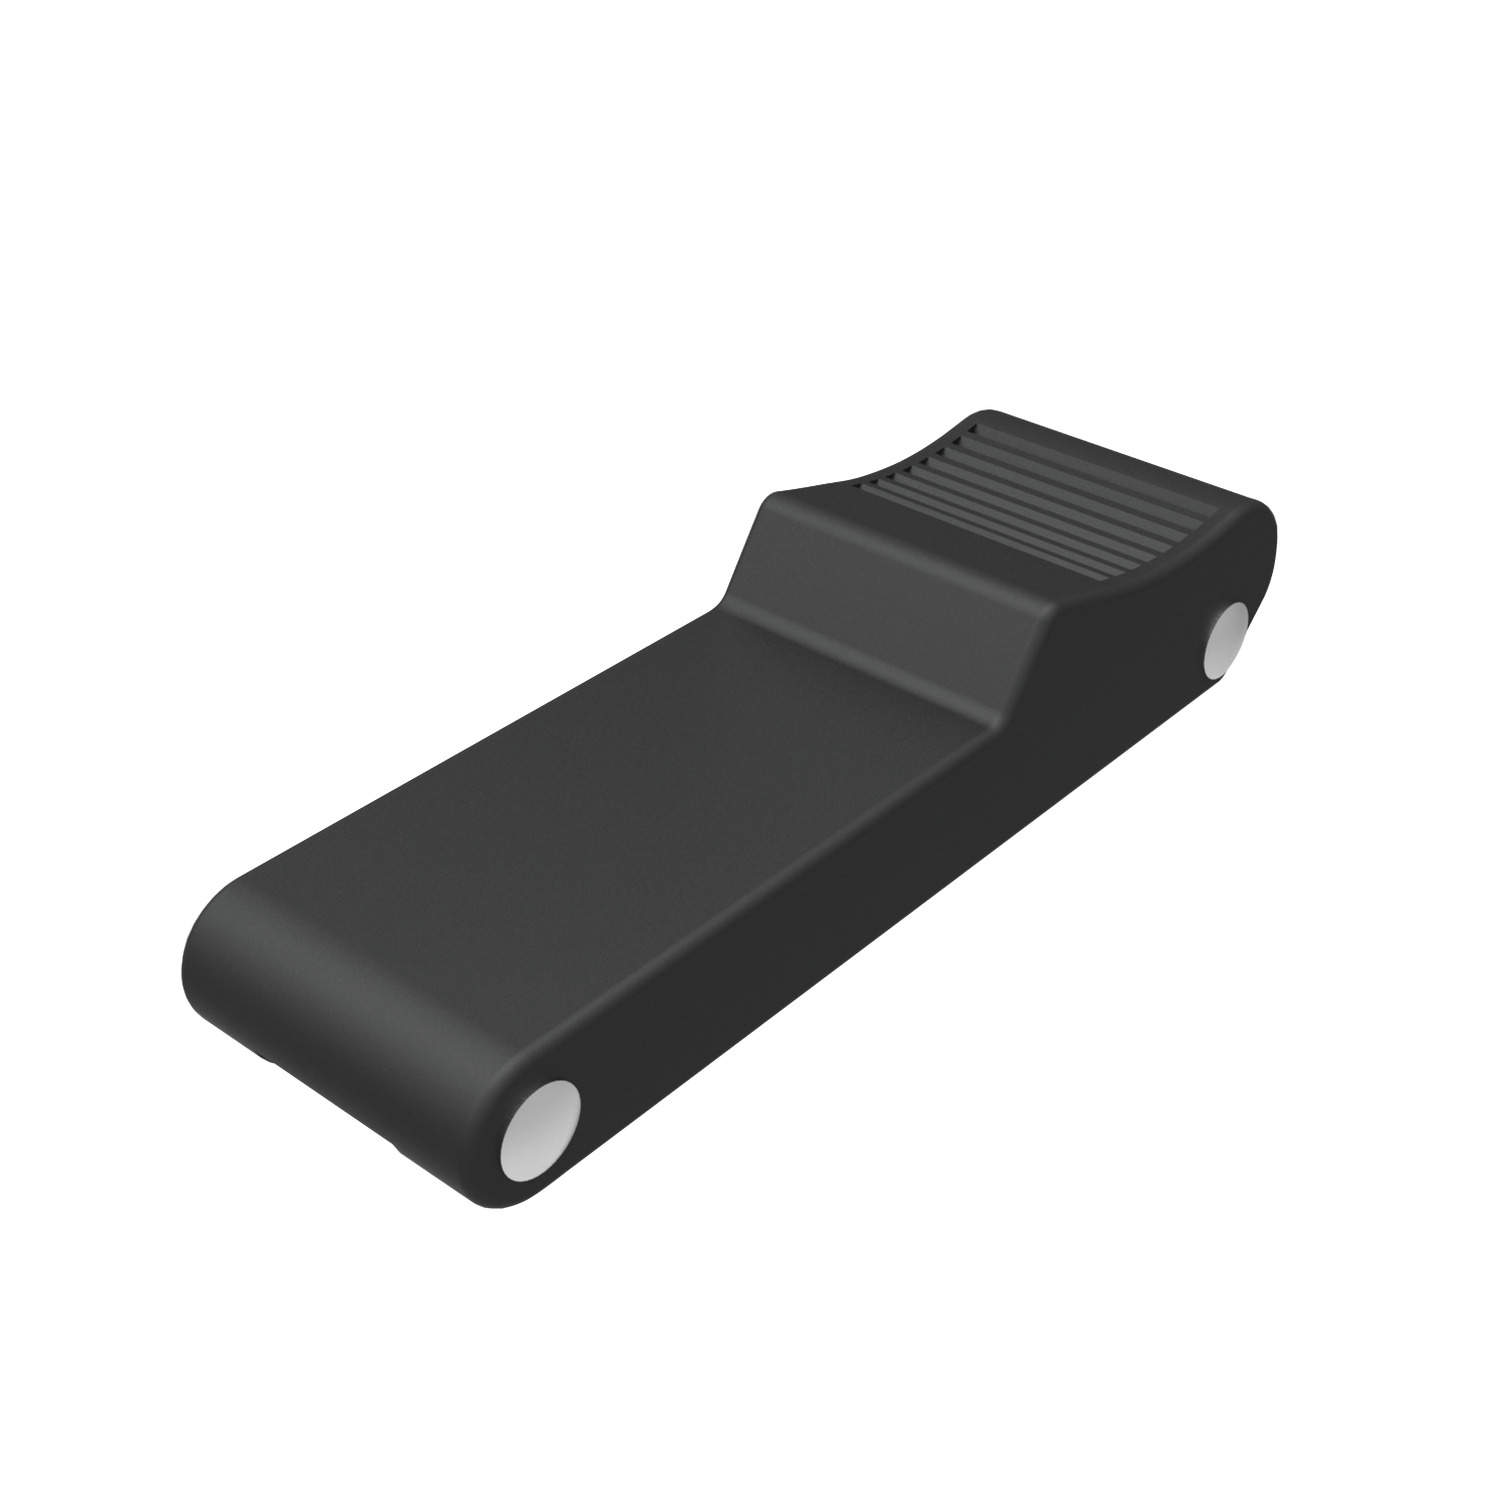 Product J0712, Soft Draw Latches rubber / 